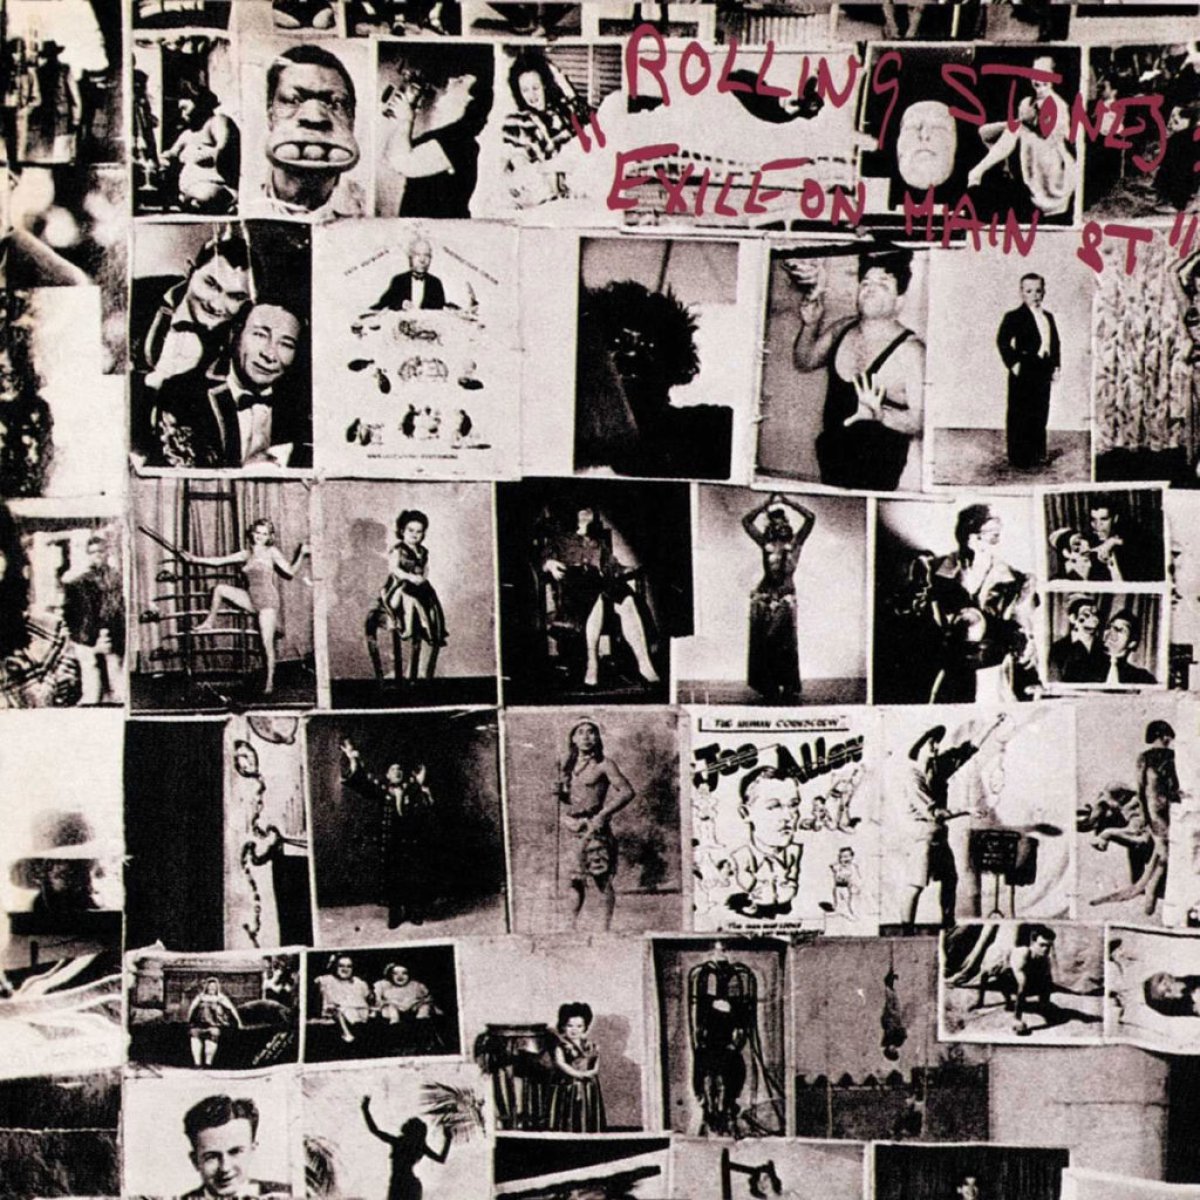 ‘Exile On Main In Street’ - The Rolling Stones